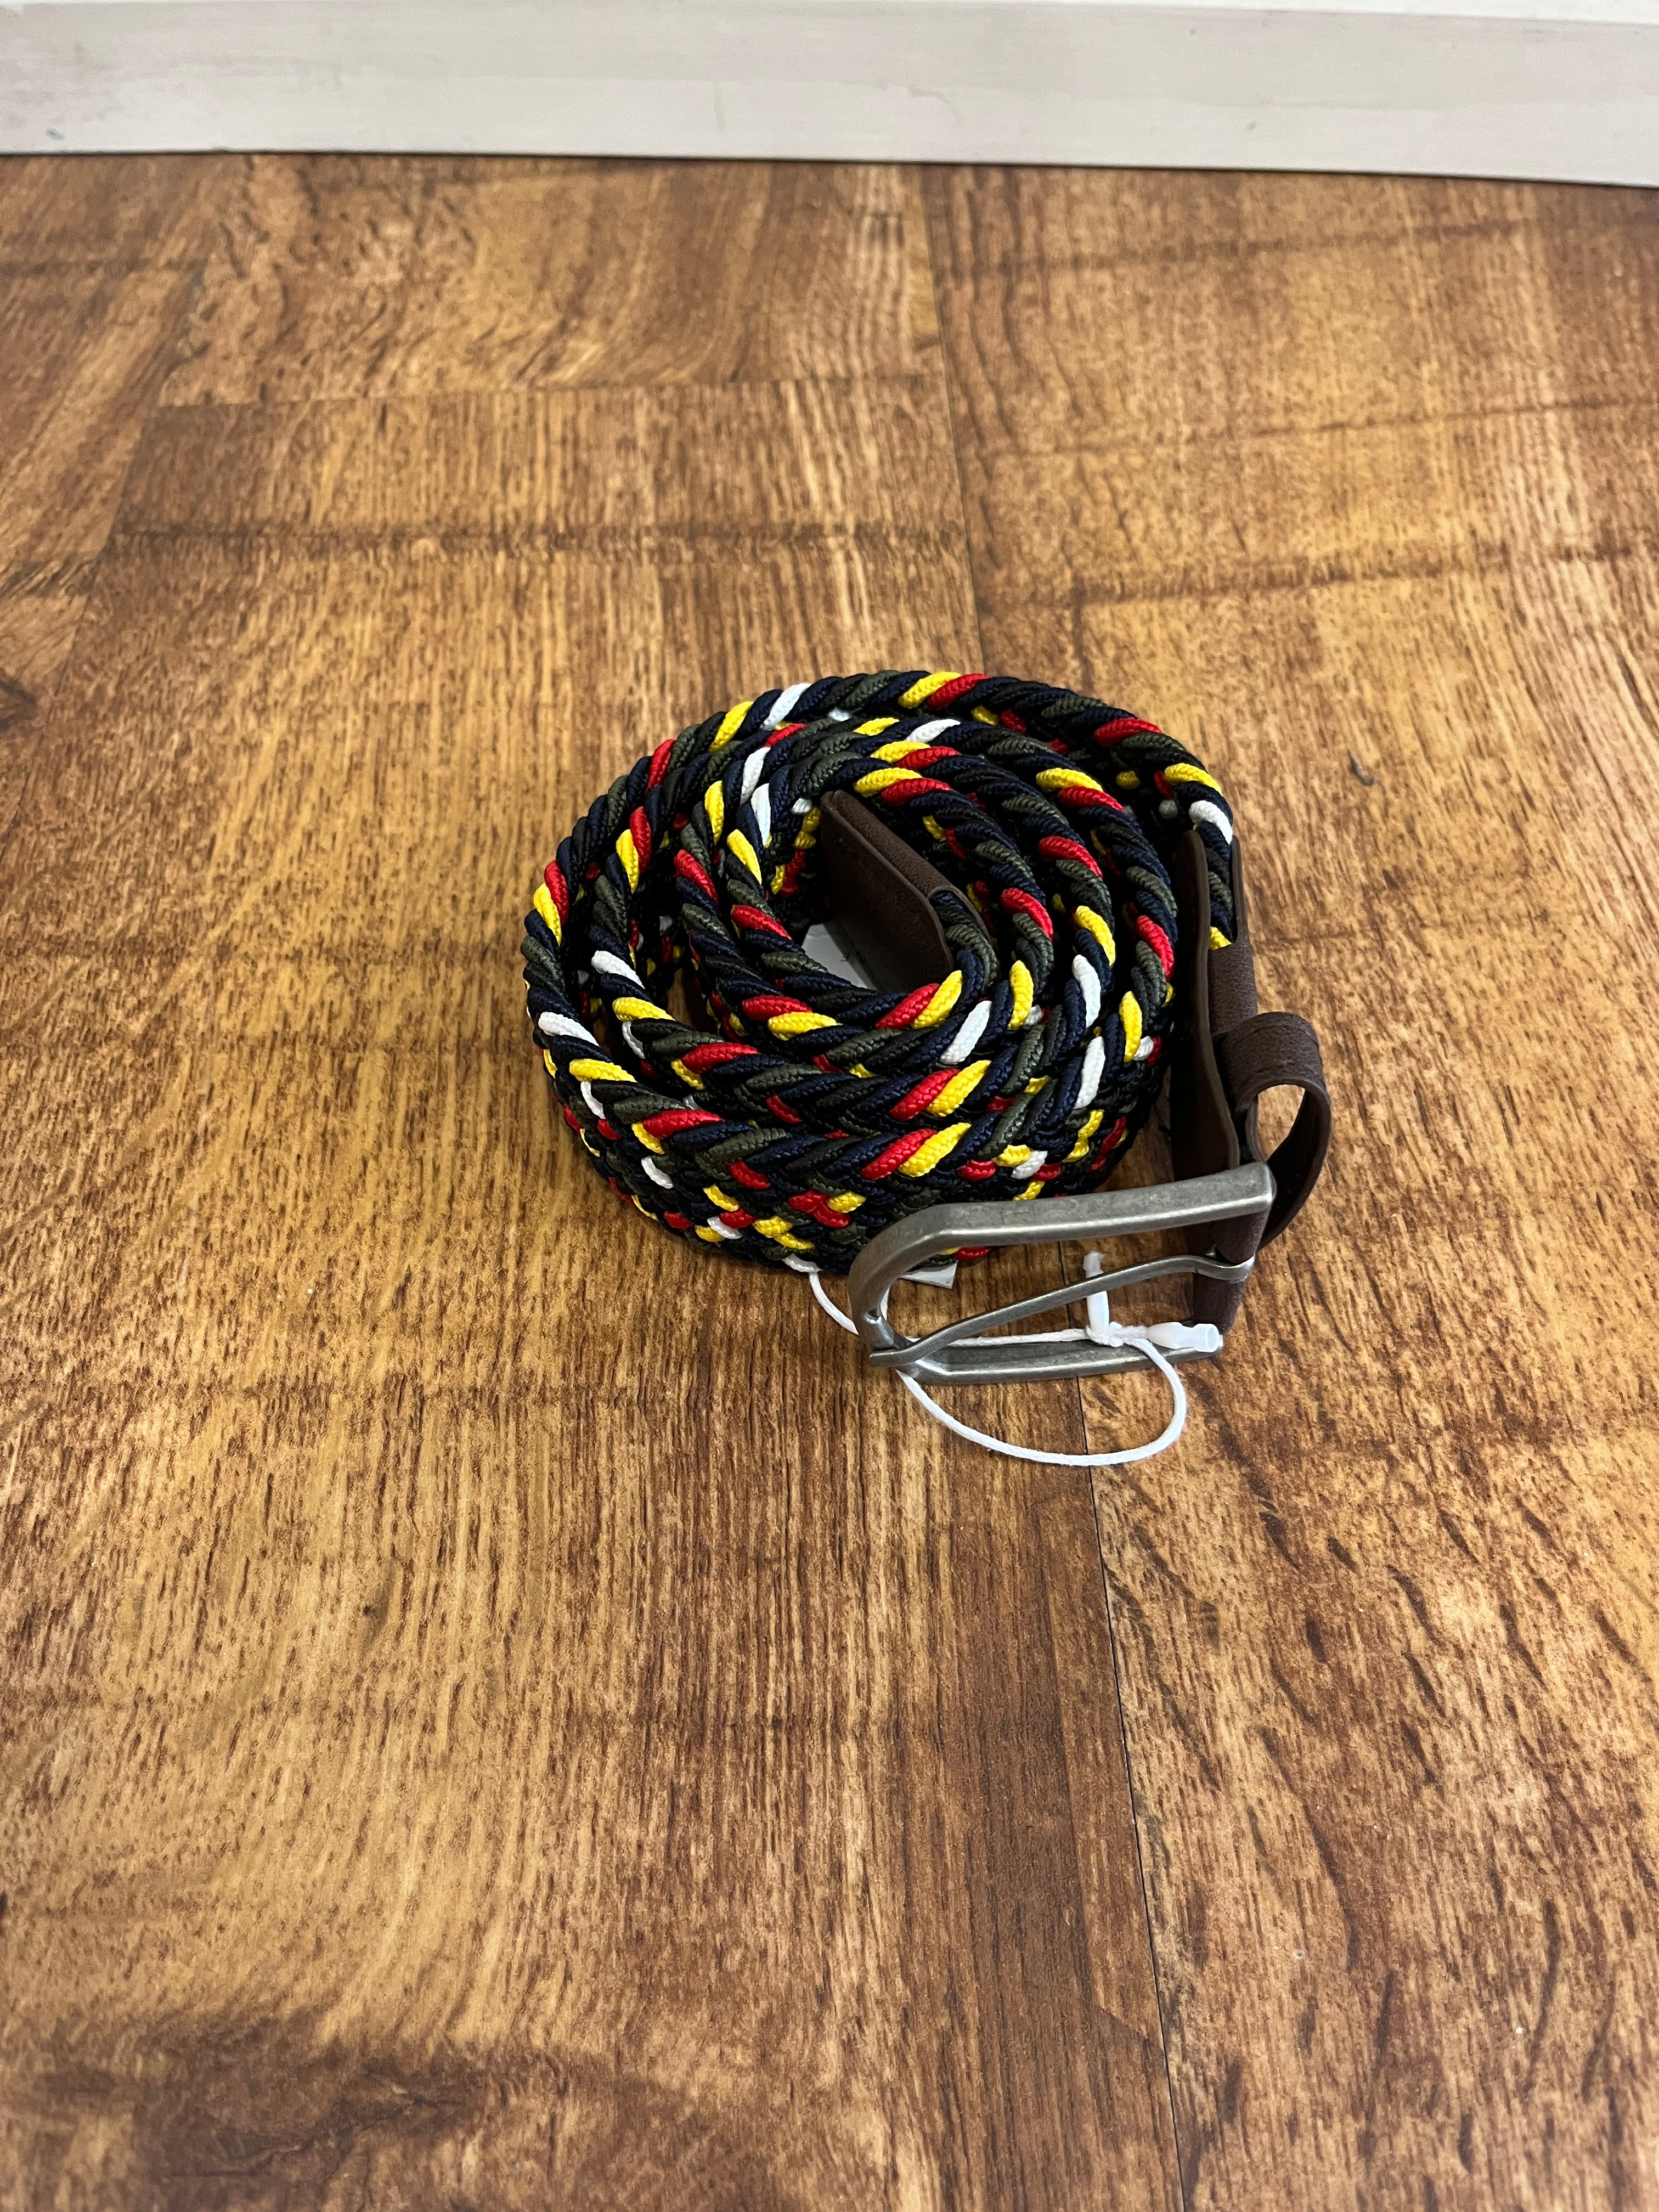 YELLOW MIX WOVEN BELT FROM OXFORD LEATHER CRAFT